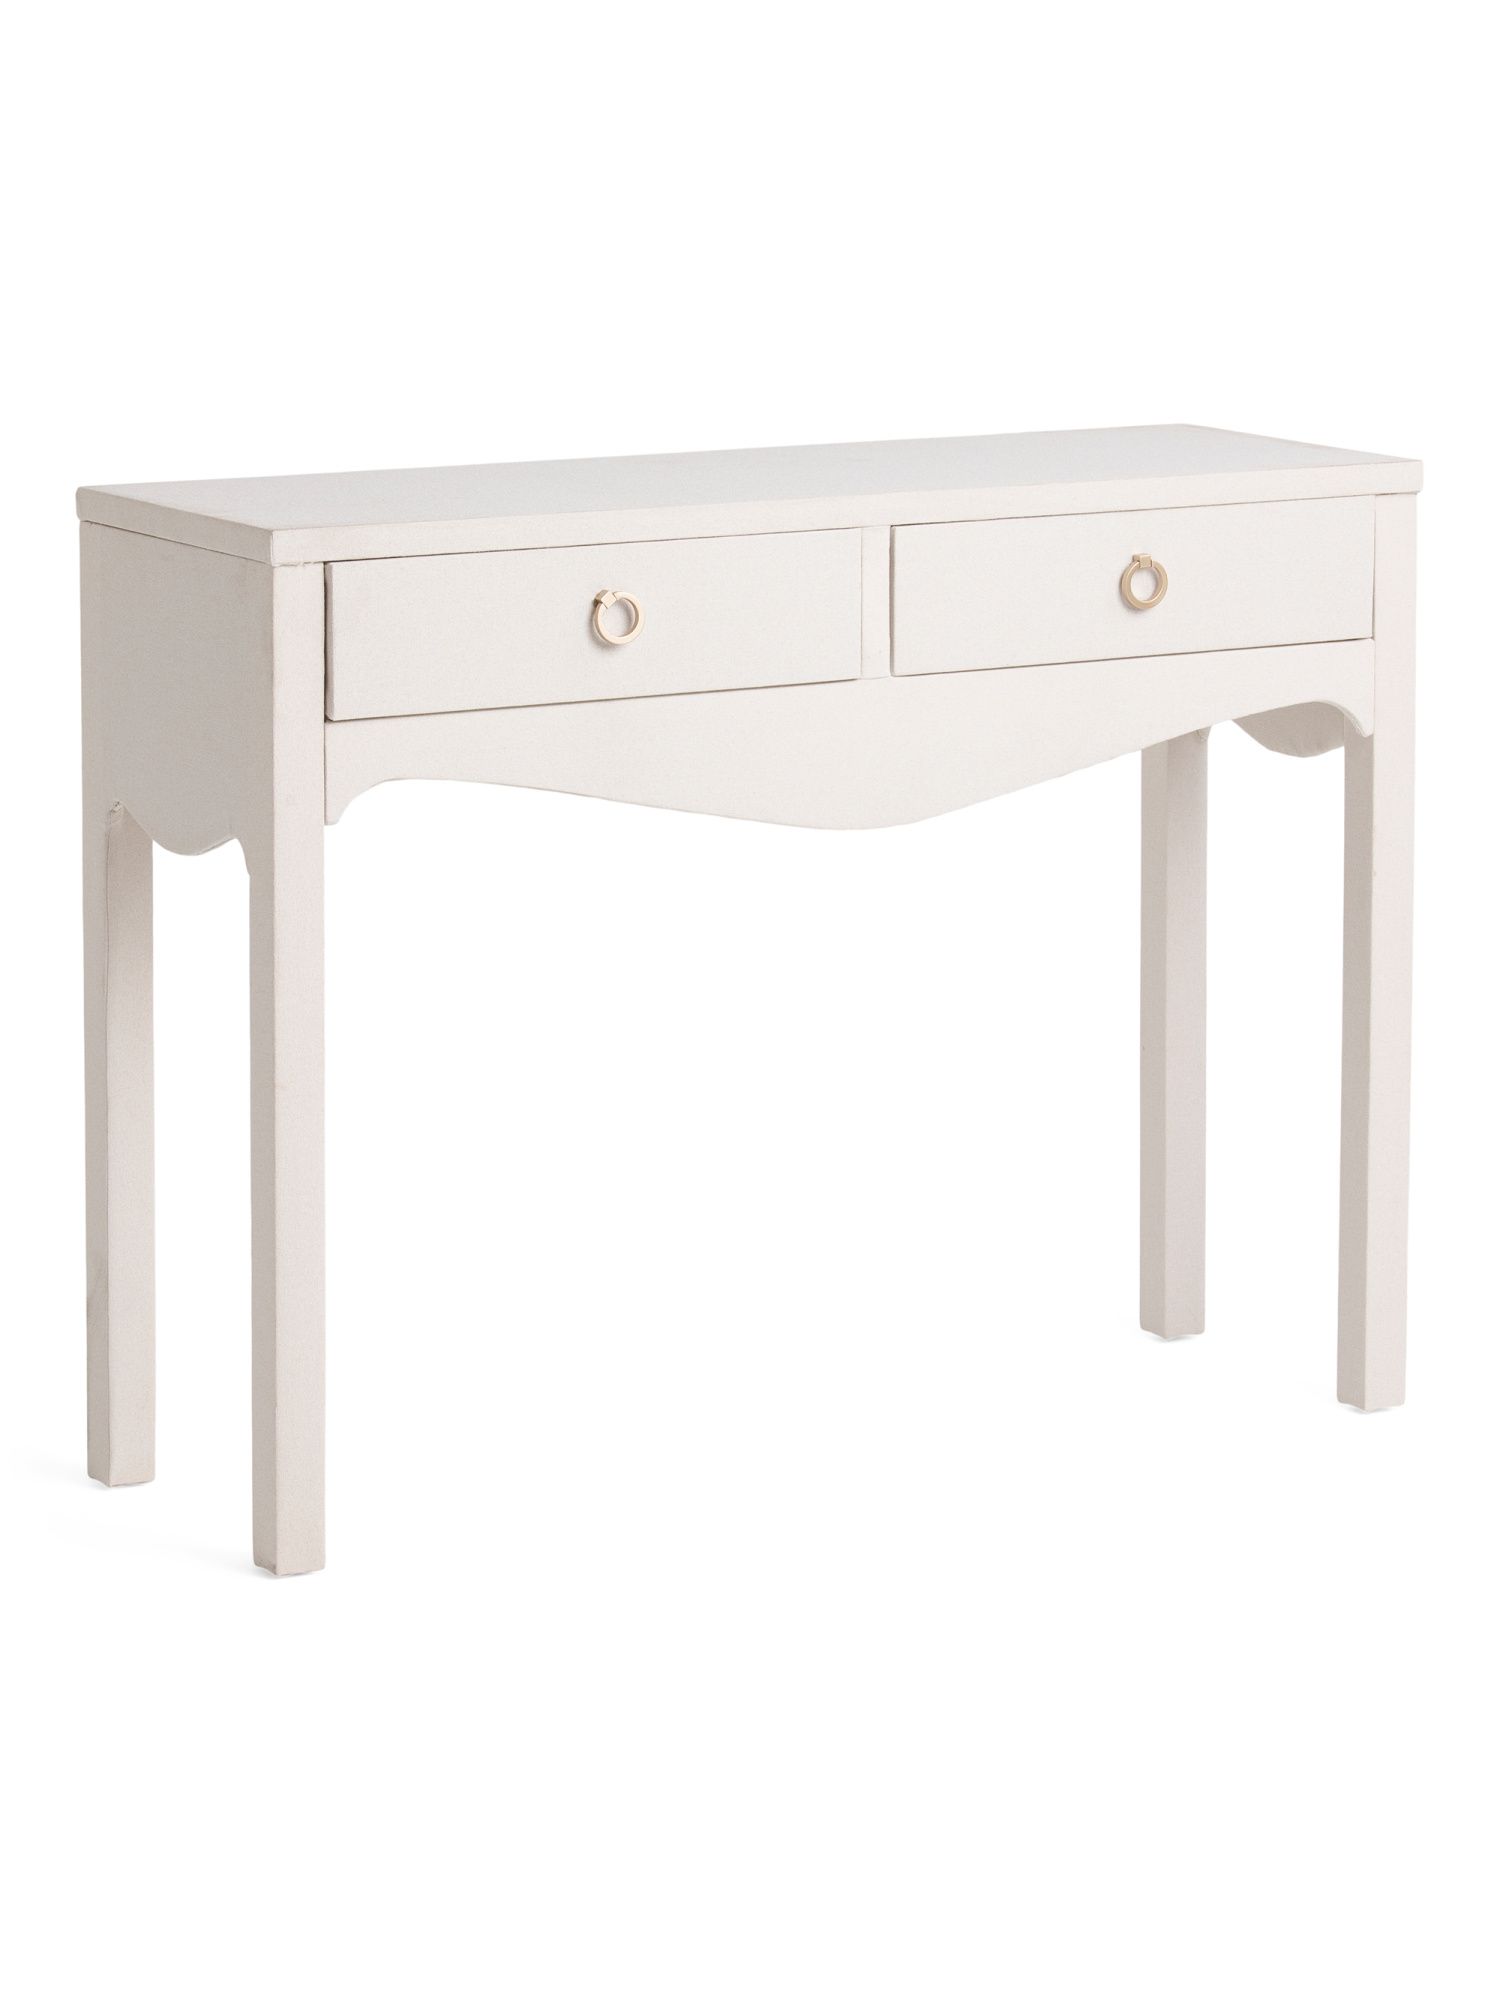 42in Linen Console Table | Marshalls